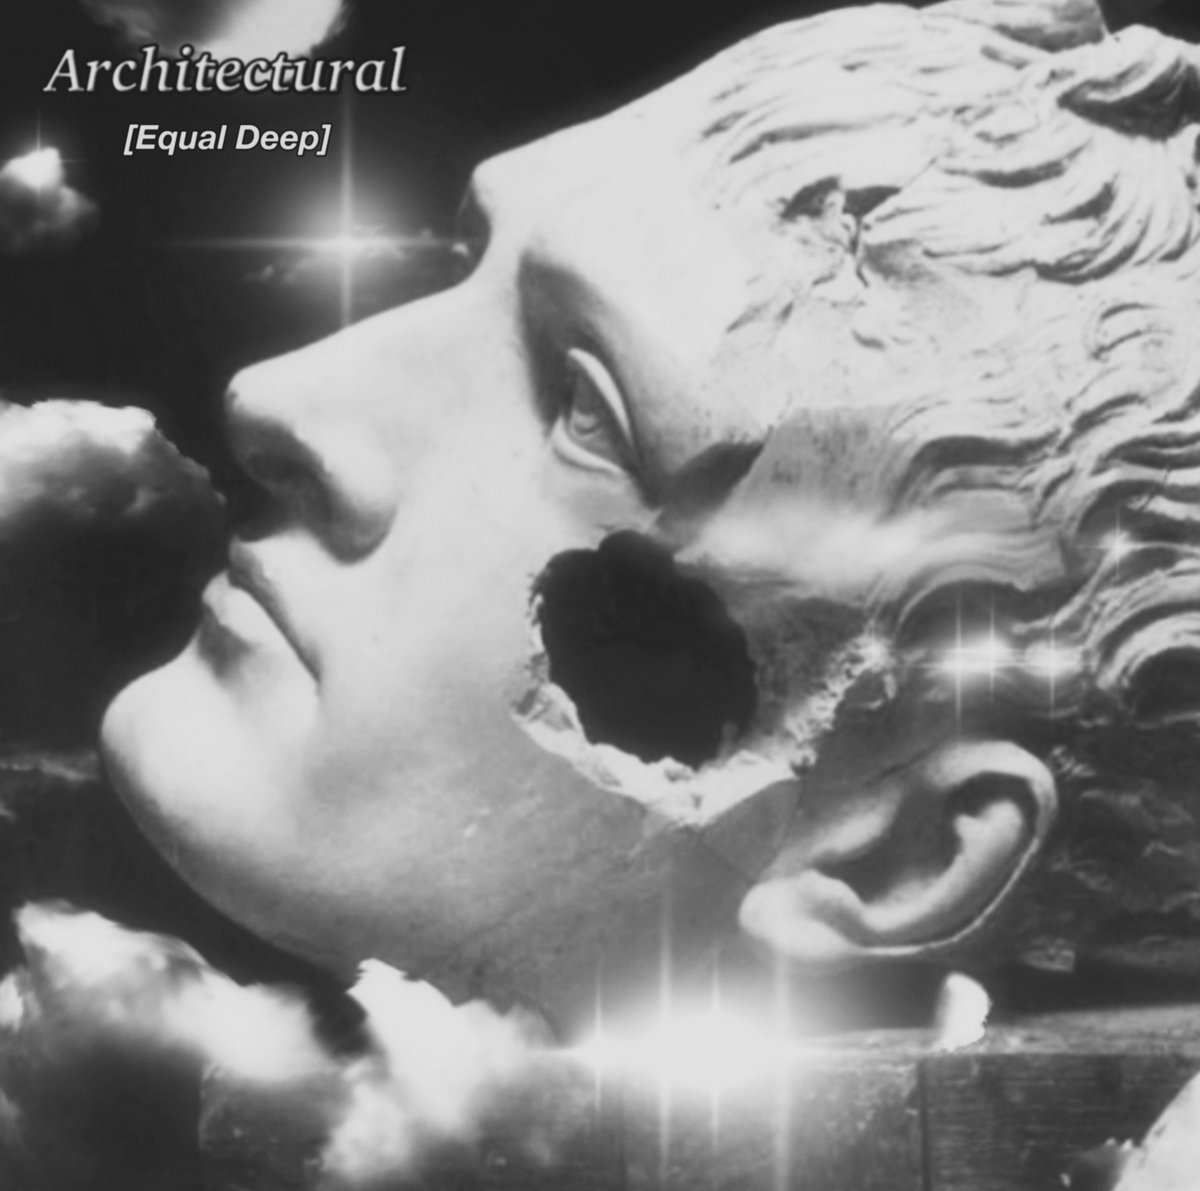 Architectural – Equal Deep